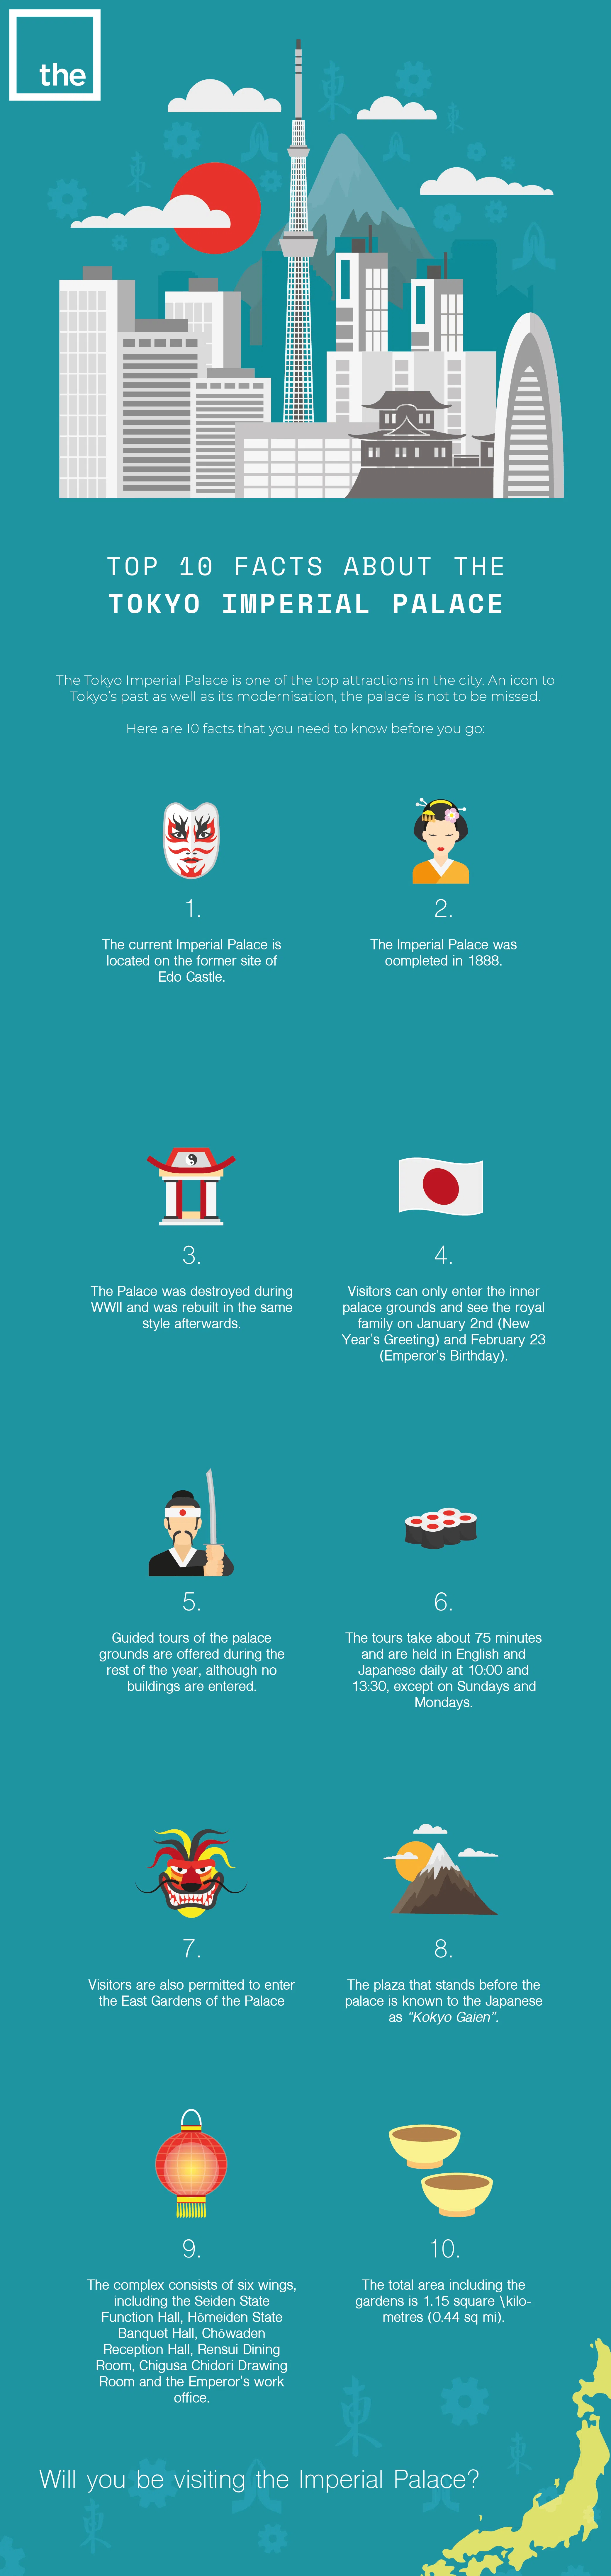 Tokyo Imperial Palace Facts